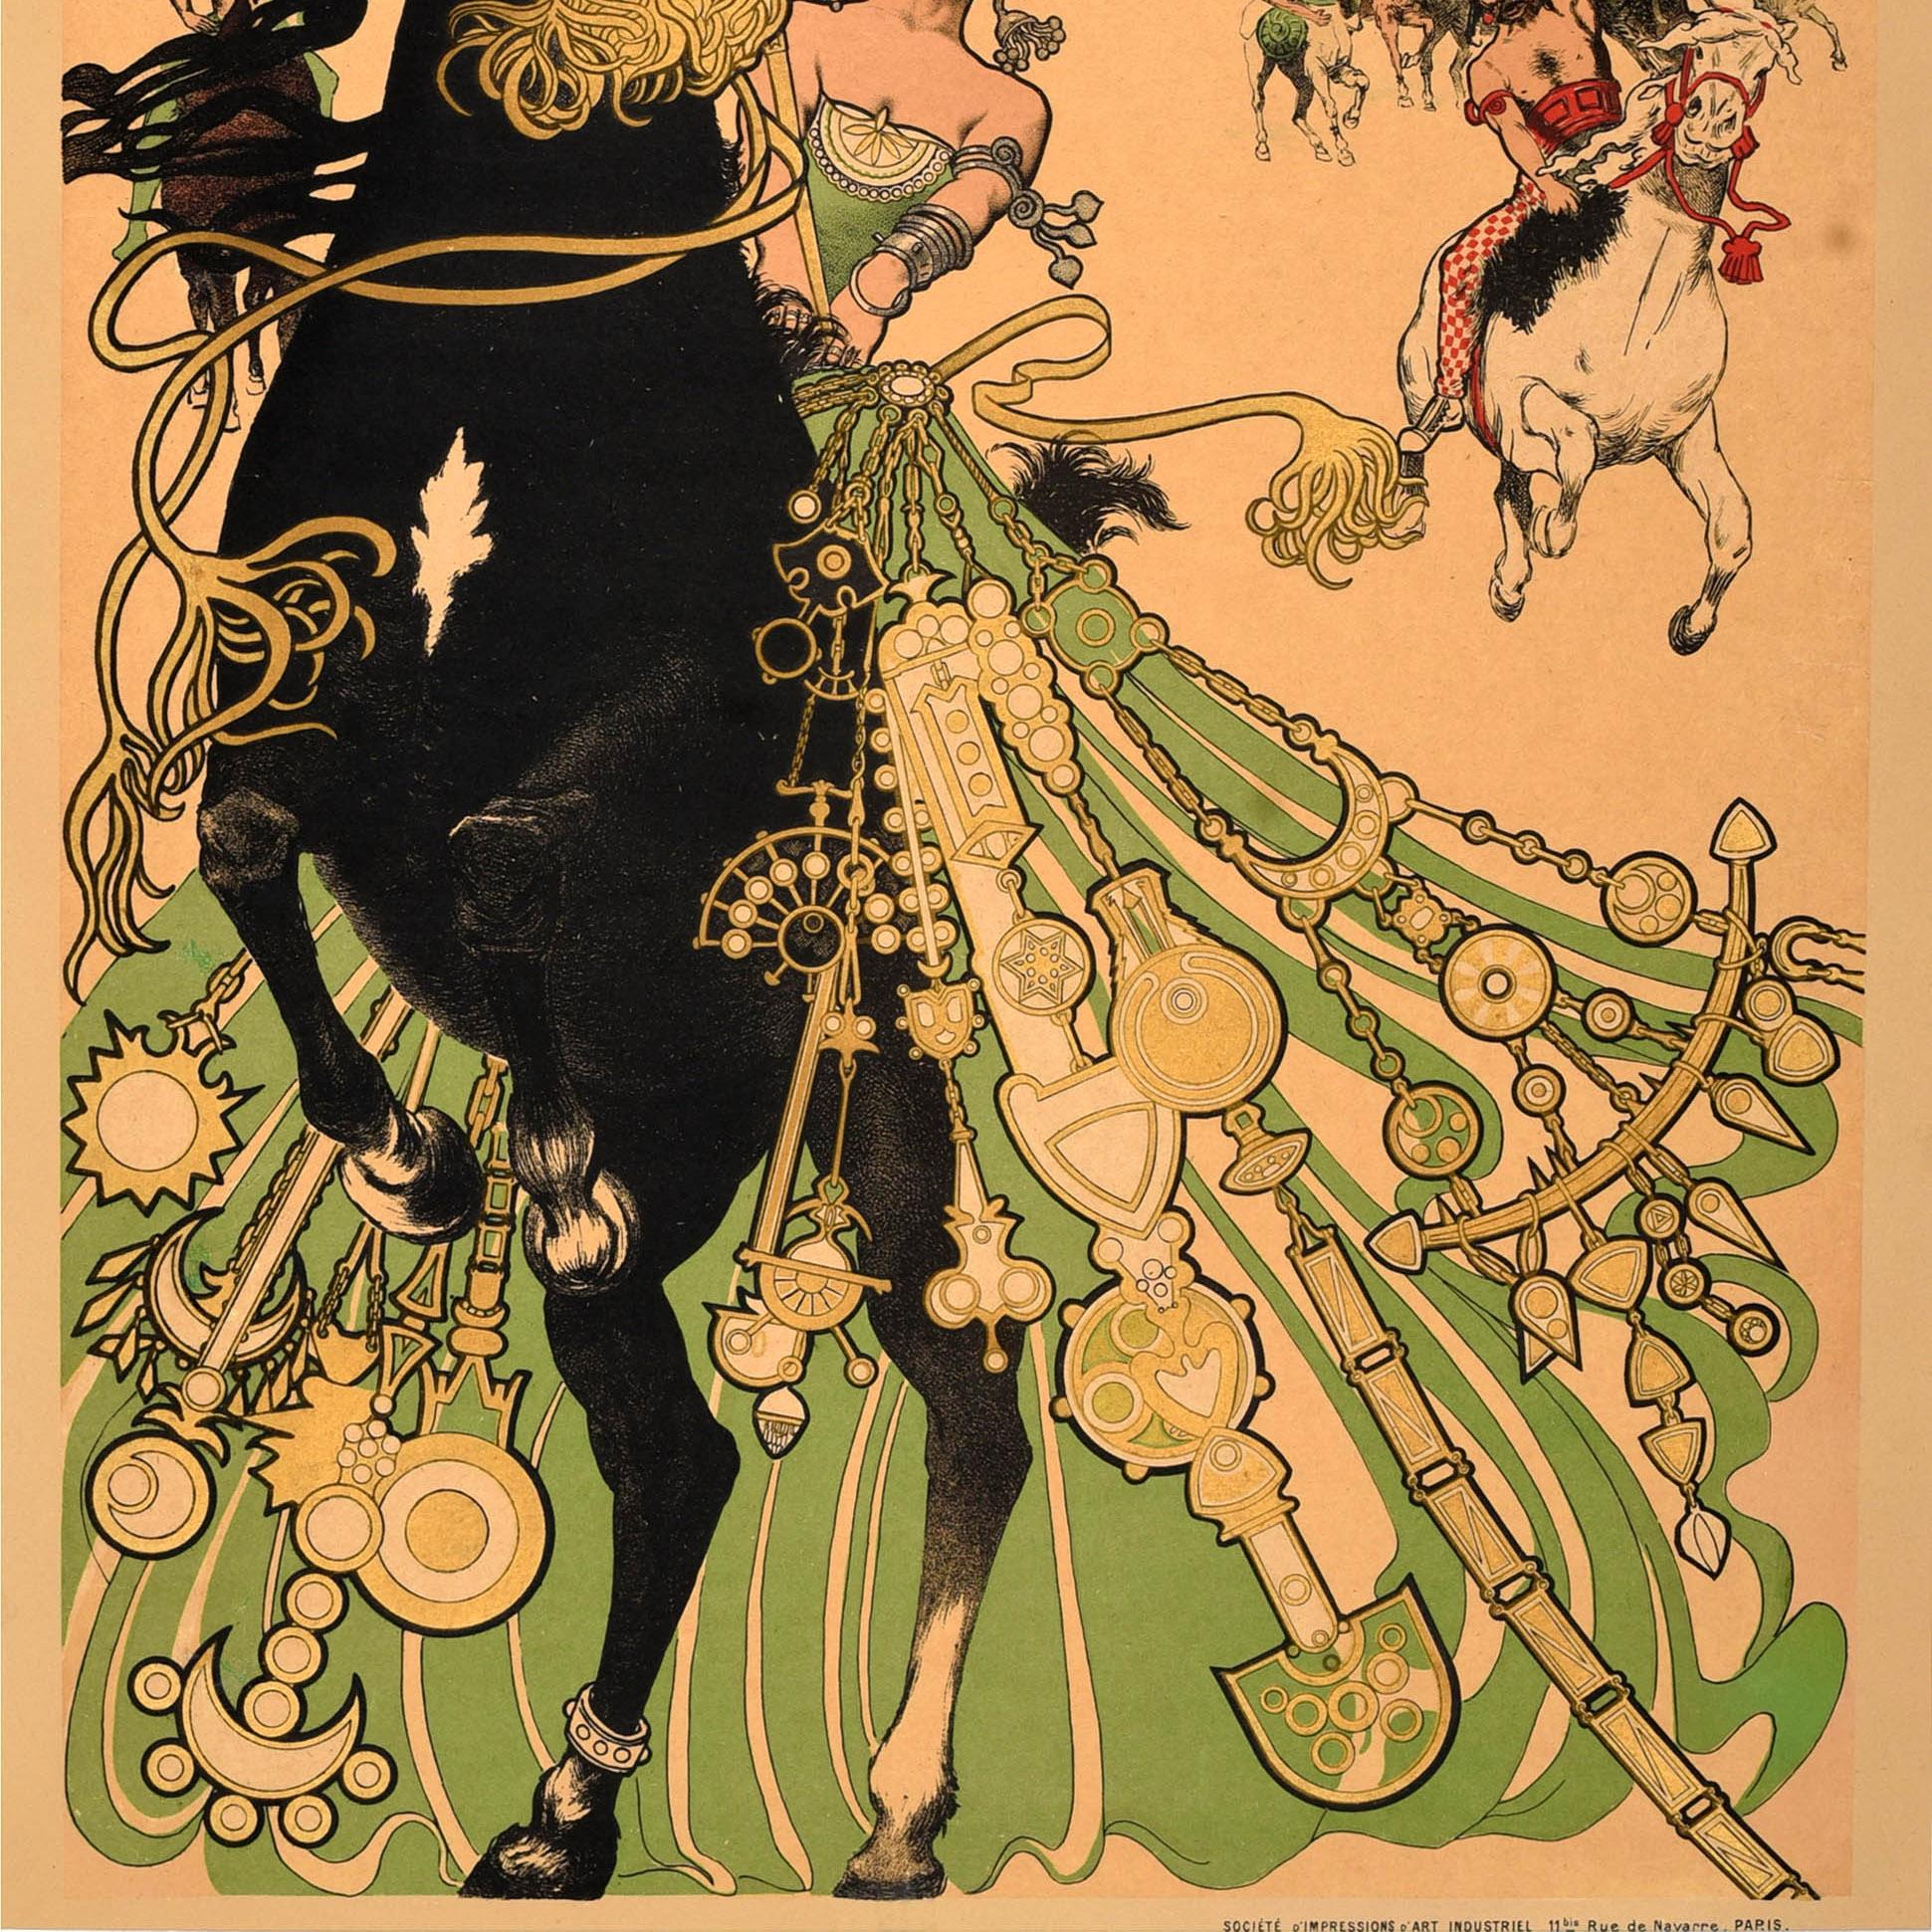 Original antique Art Nouveau poster advertising the Hippodrome Boulevard de Clichy featuring dramatic artwork by the French graphic designer Manuel Orazi (1860-1934) depicting a lady on a horse in a flamboyant costume and headdress leading other